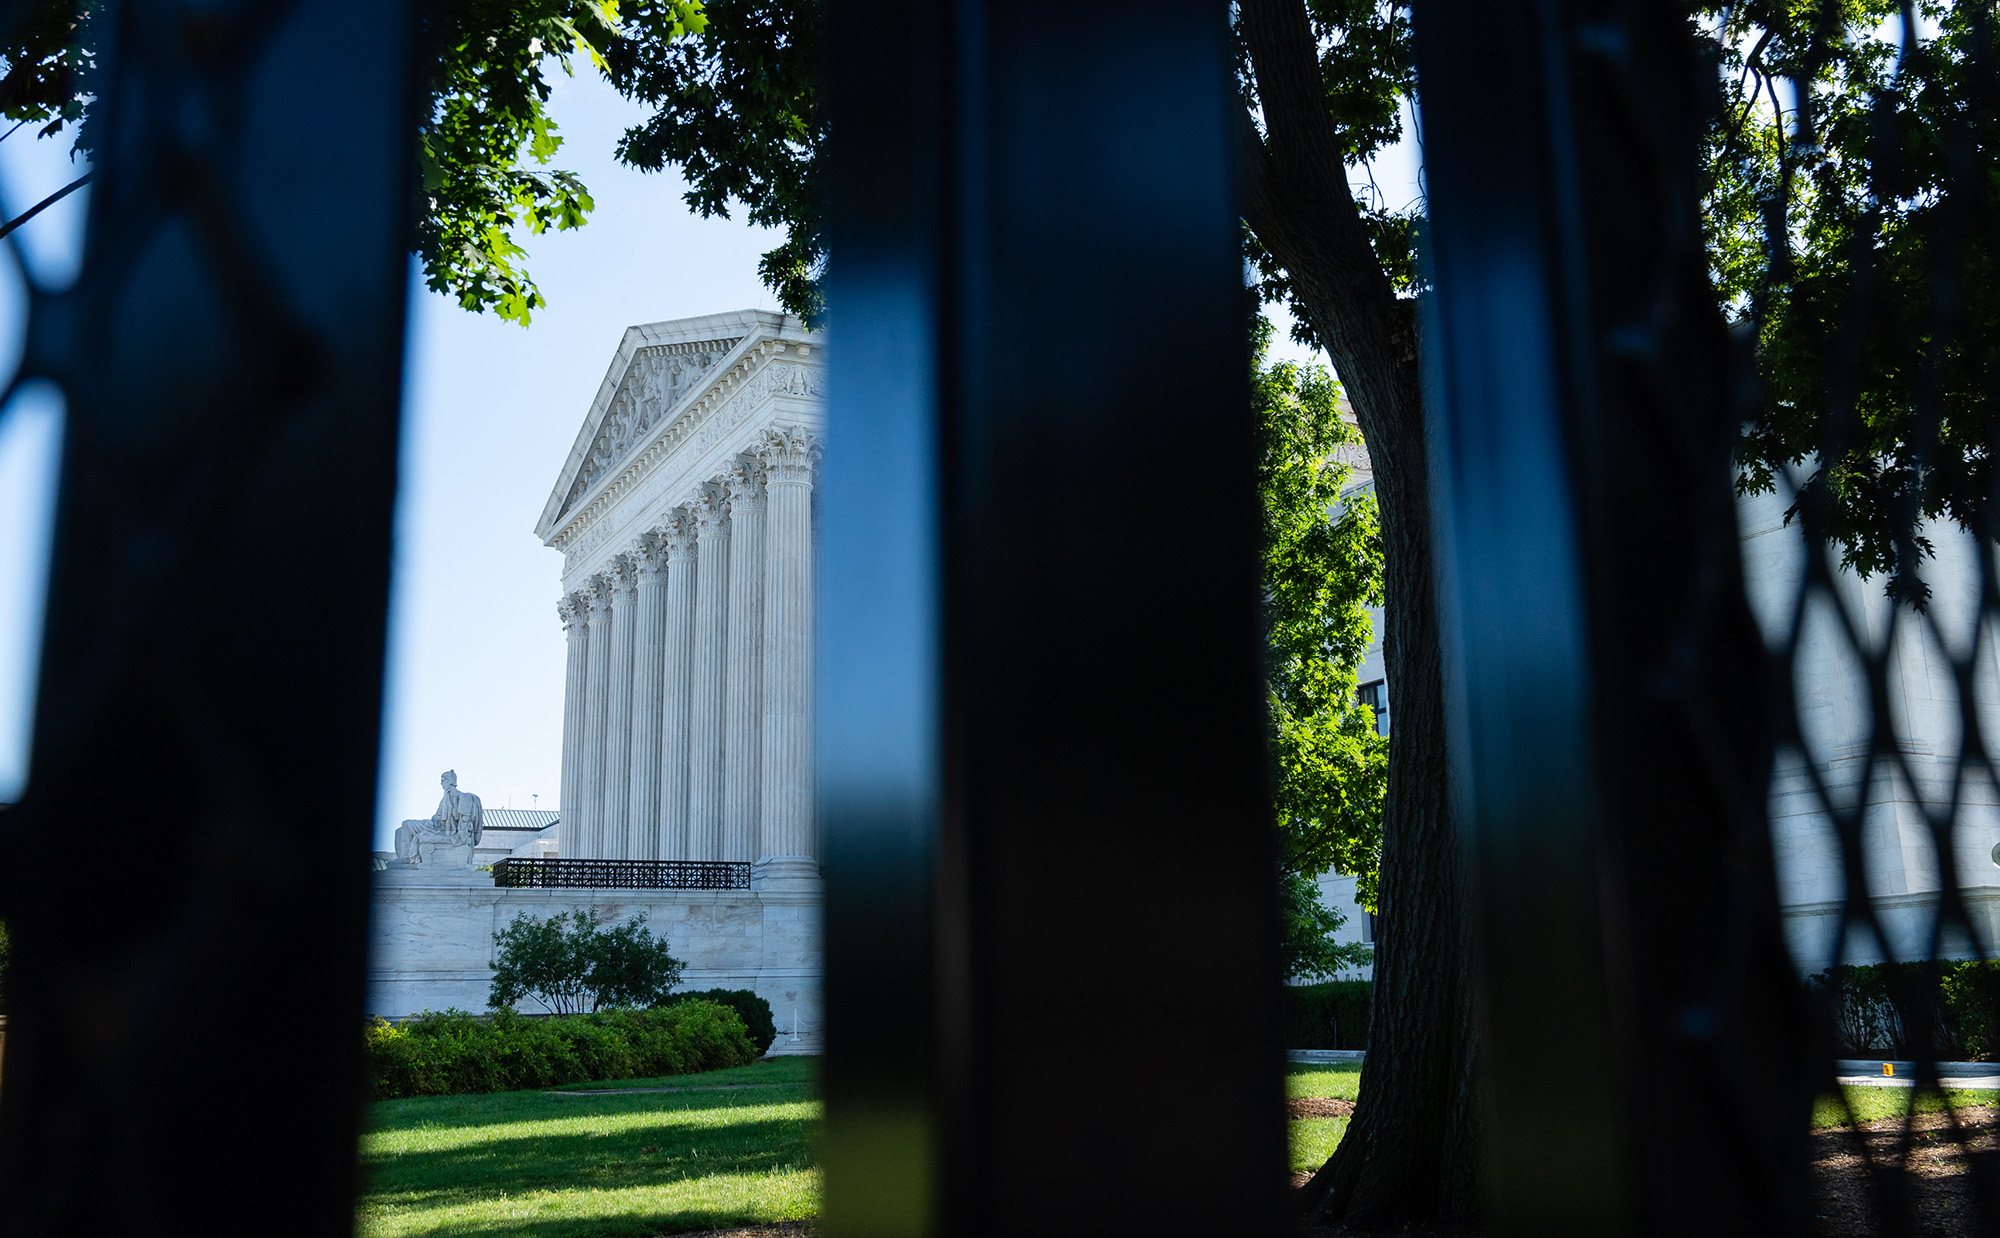 The Supreme Court through security fencing in Washington, D.C.